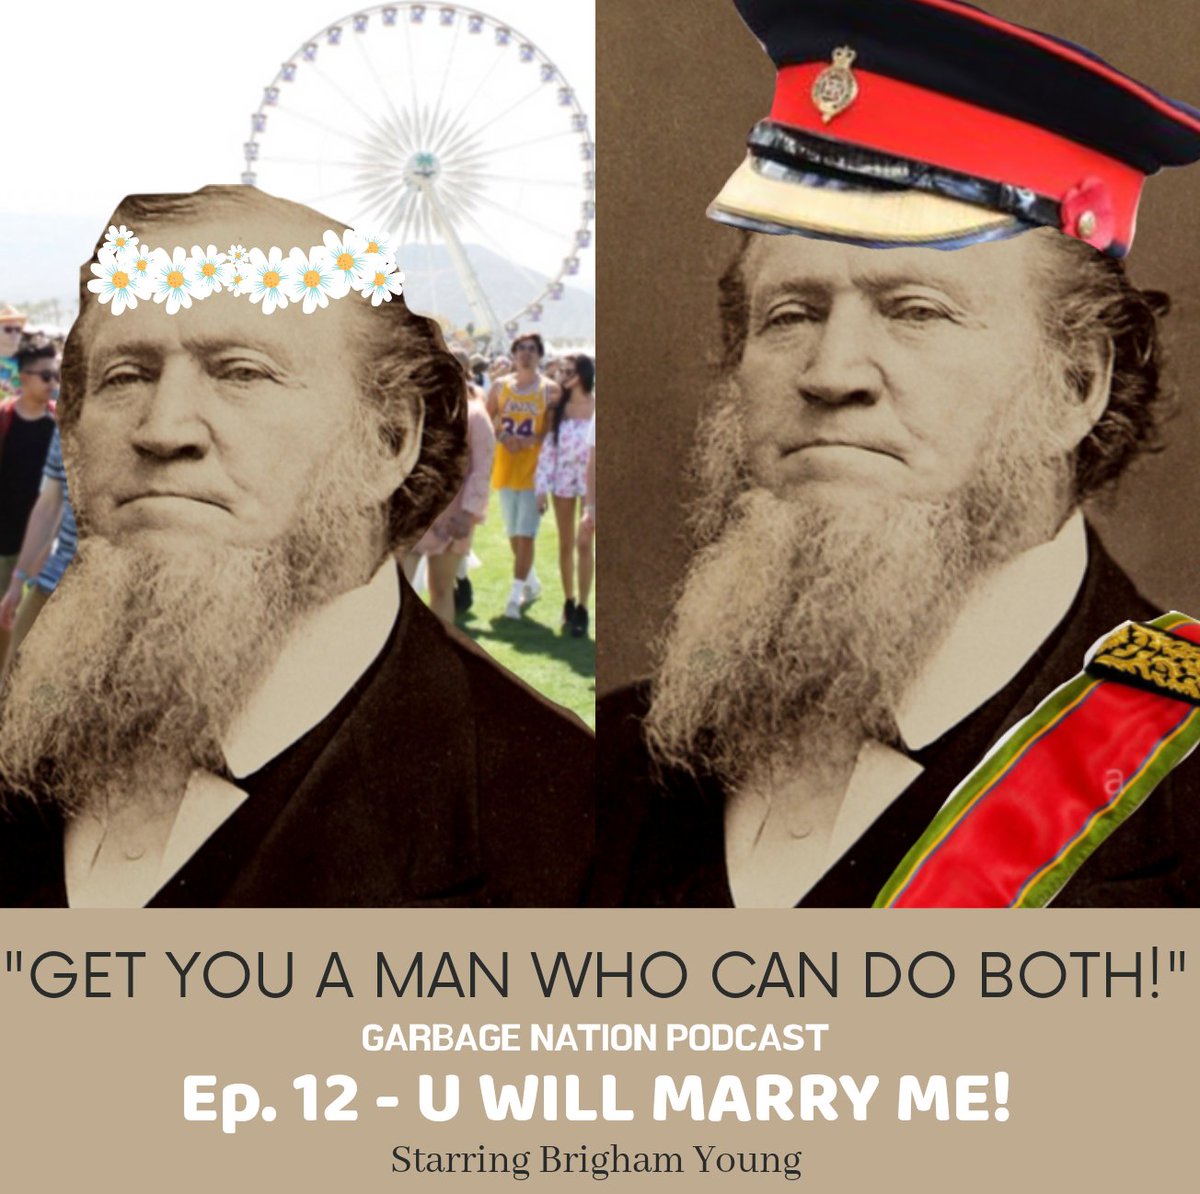 Listen to our Brigham Young episode, U WILL MARRY ME on Apple Podcasts, Google Podcasts, Stitcher, and Spotify! #exmo #exmormon #brighamyoung #exmomemes #exmormonmemes #mormonstories #bringemyoung #utah